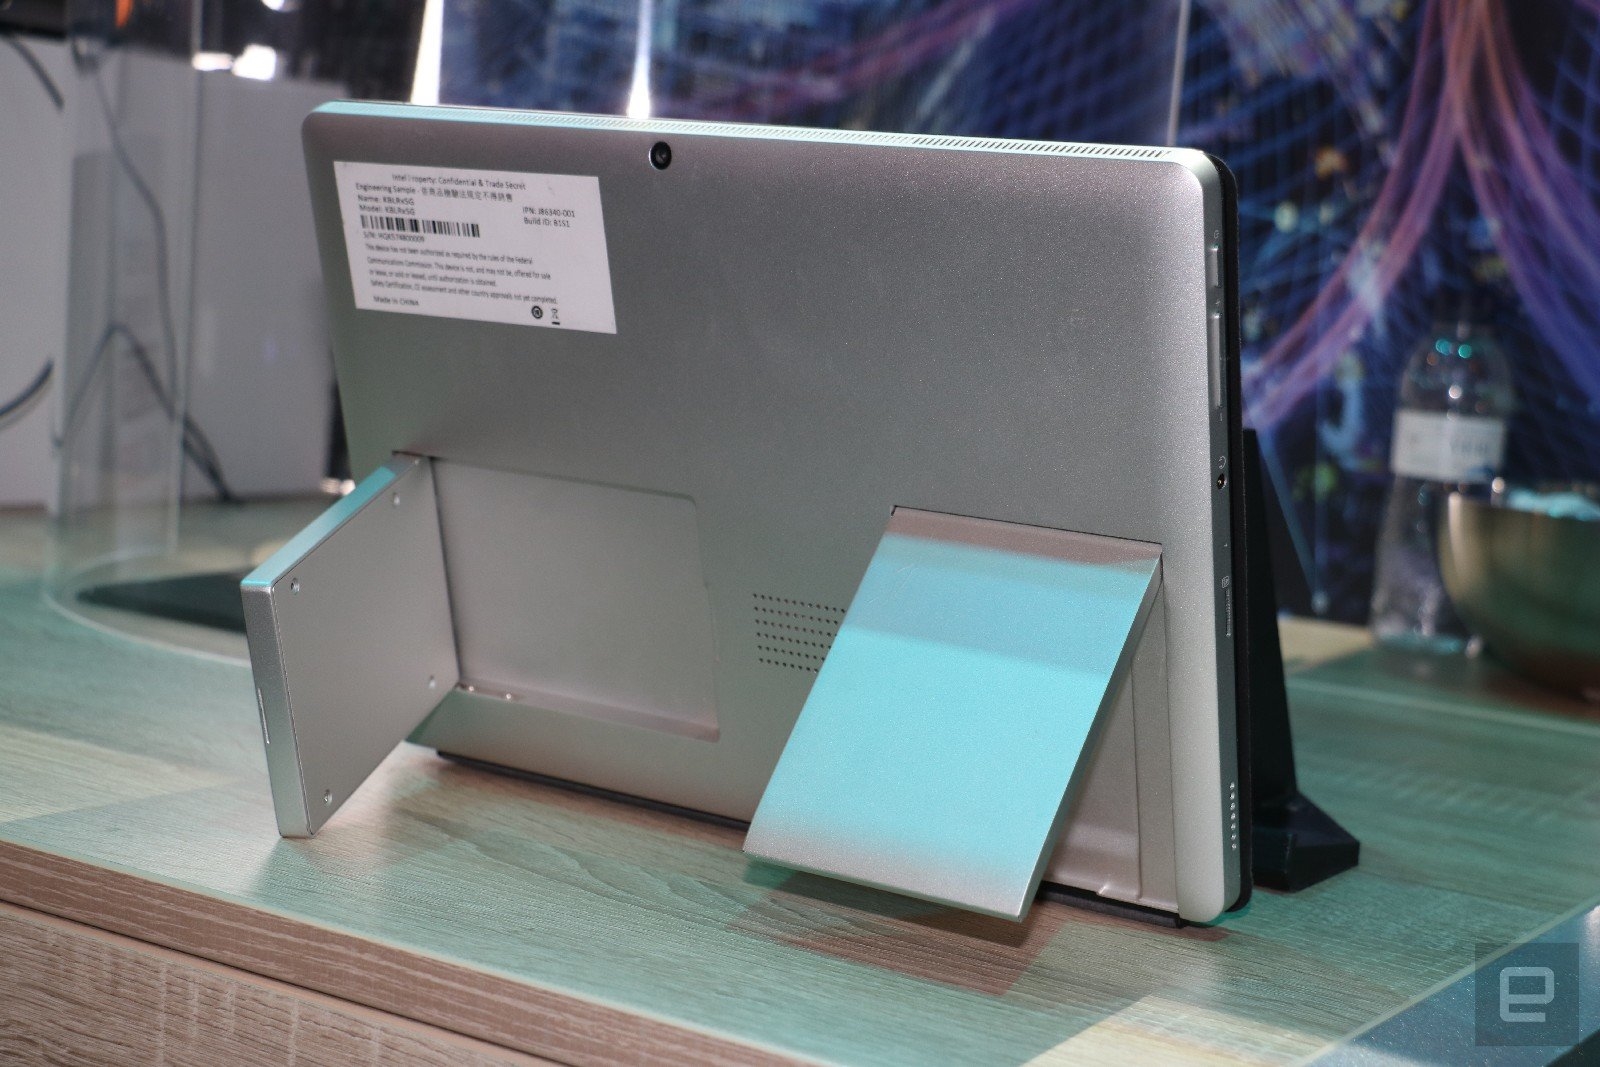 Intel's PC concept 'hides' a 5G antenna in a plump kickstand | DeviceDaily.com